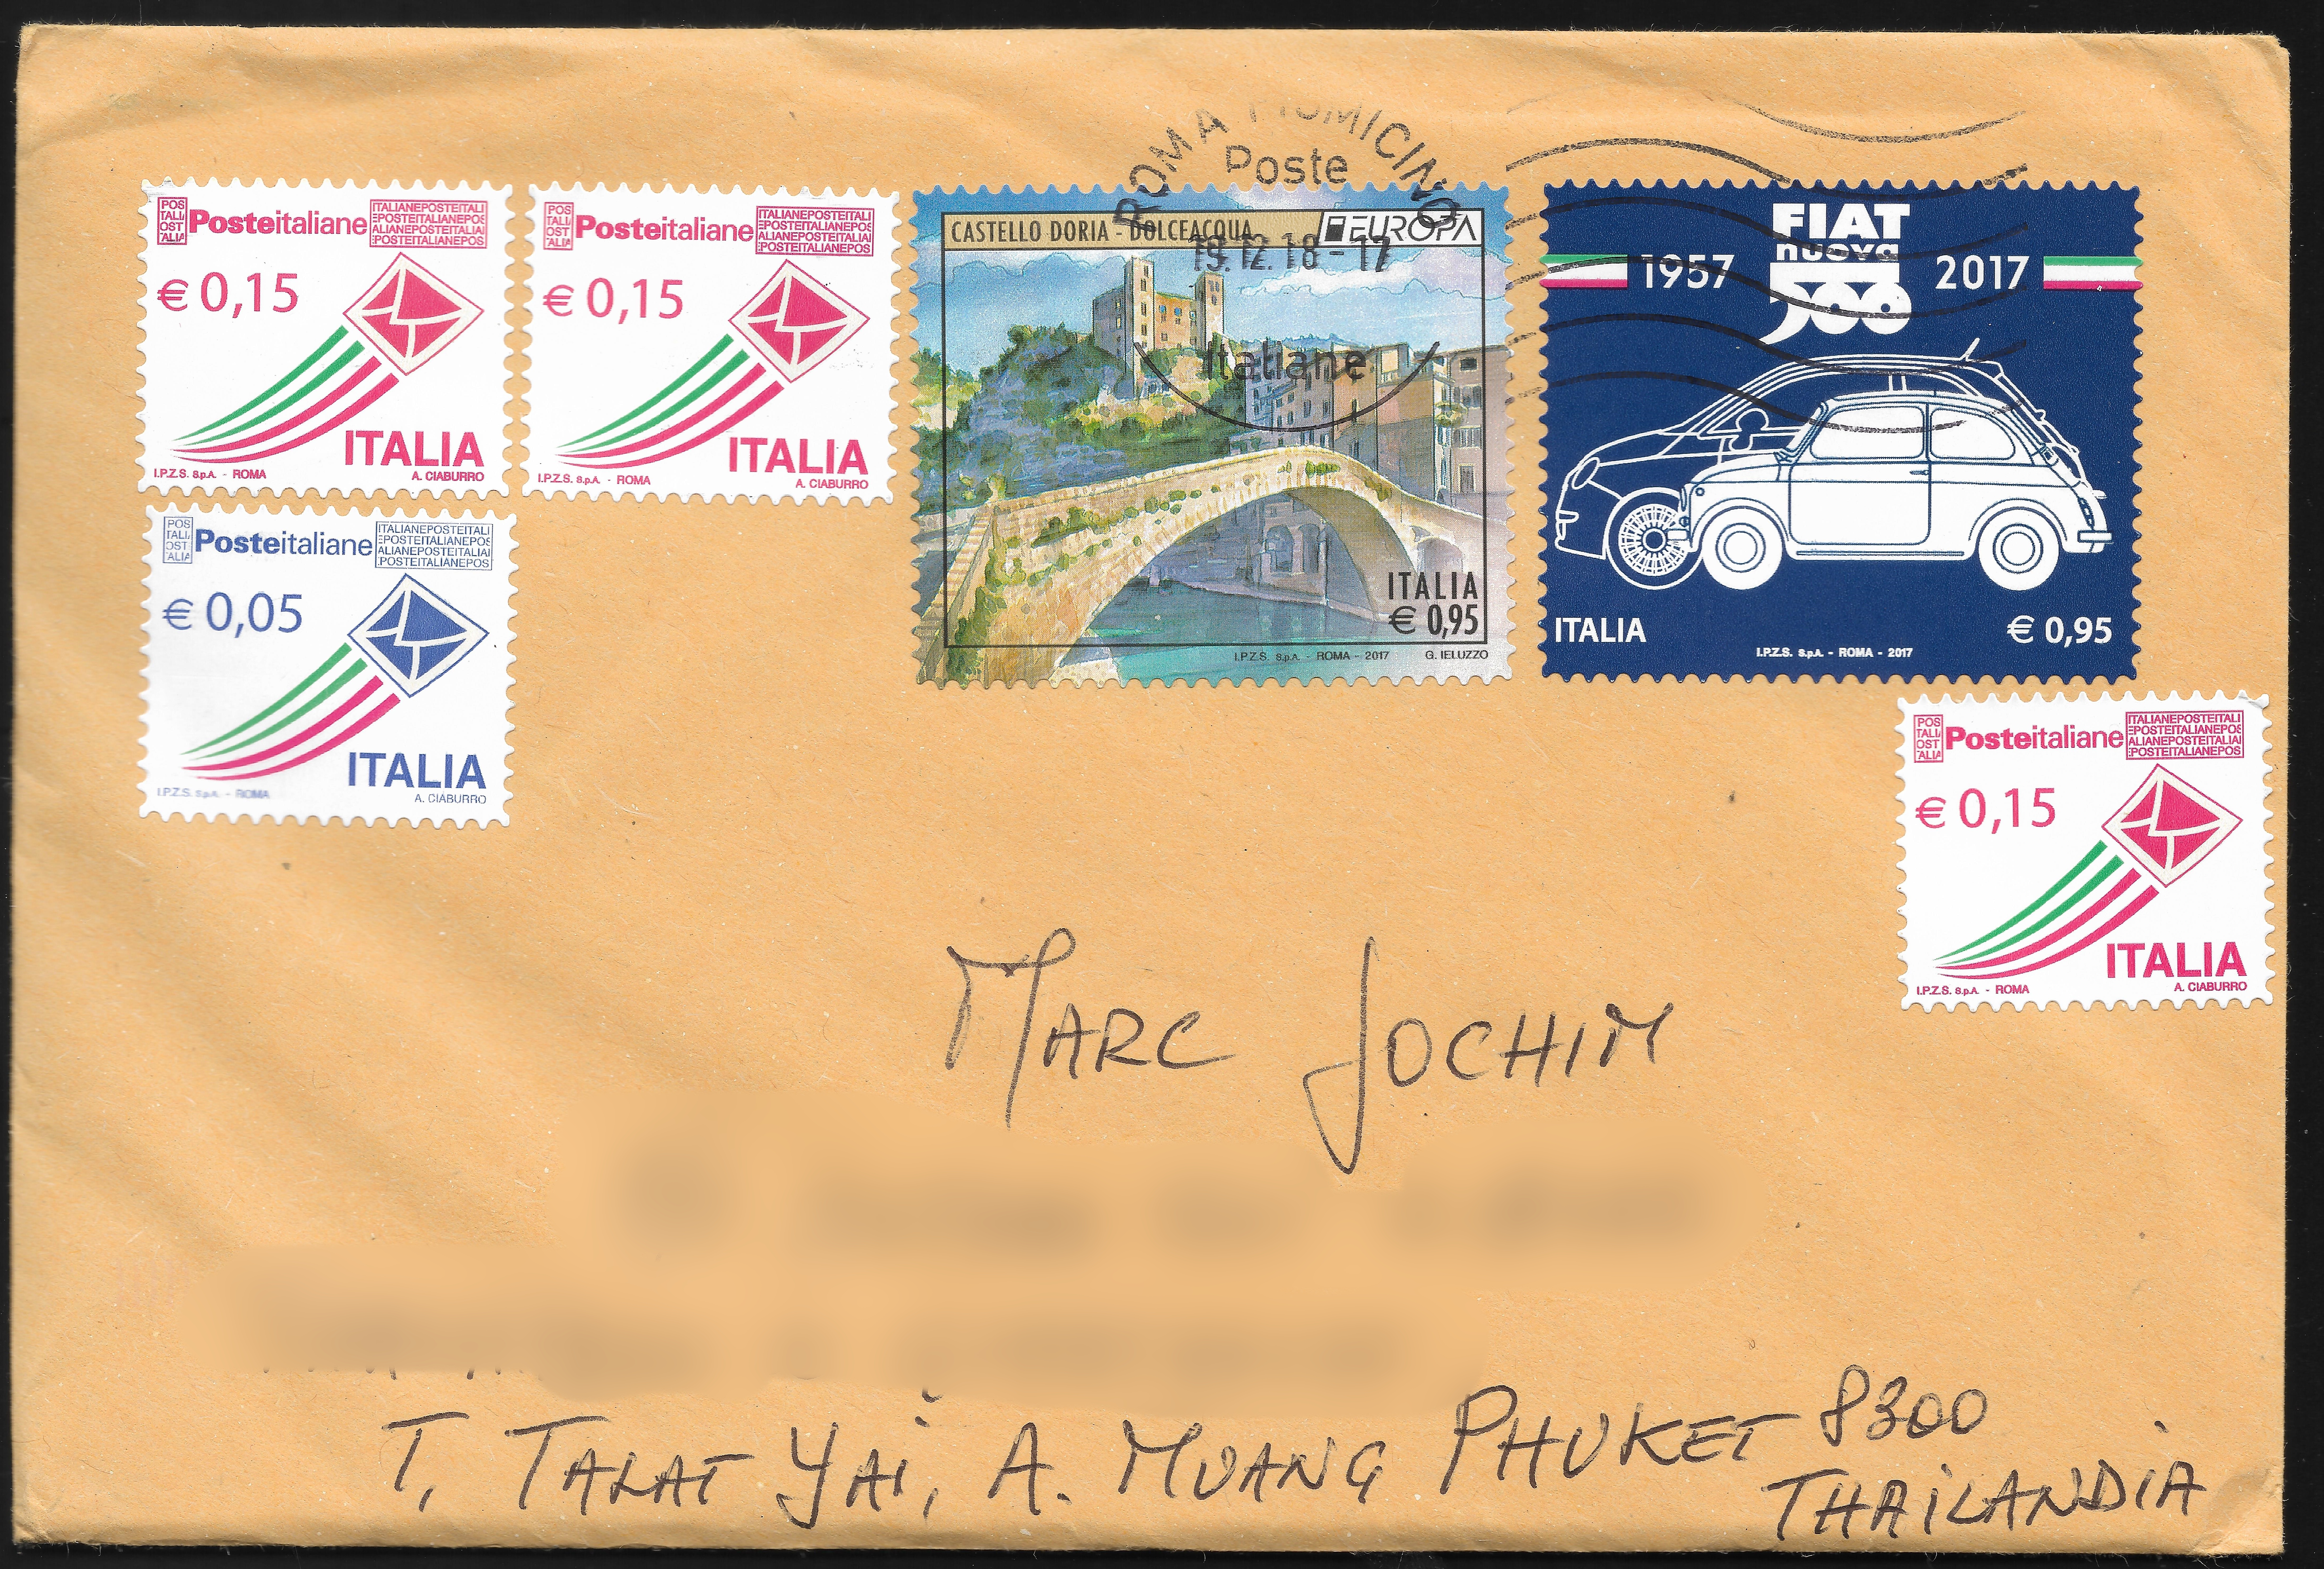 I love when my stamp purchases include collectible stamps on the enclosing covers as well. Although it would be nice if the various postal facilities would cooperated by actually cancelling all the stamps.... - my scans